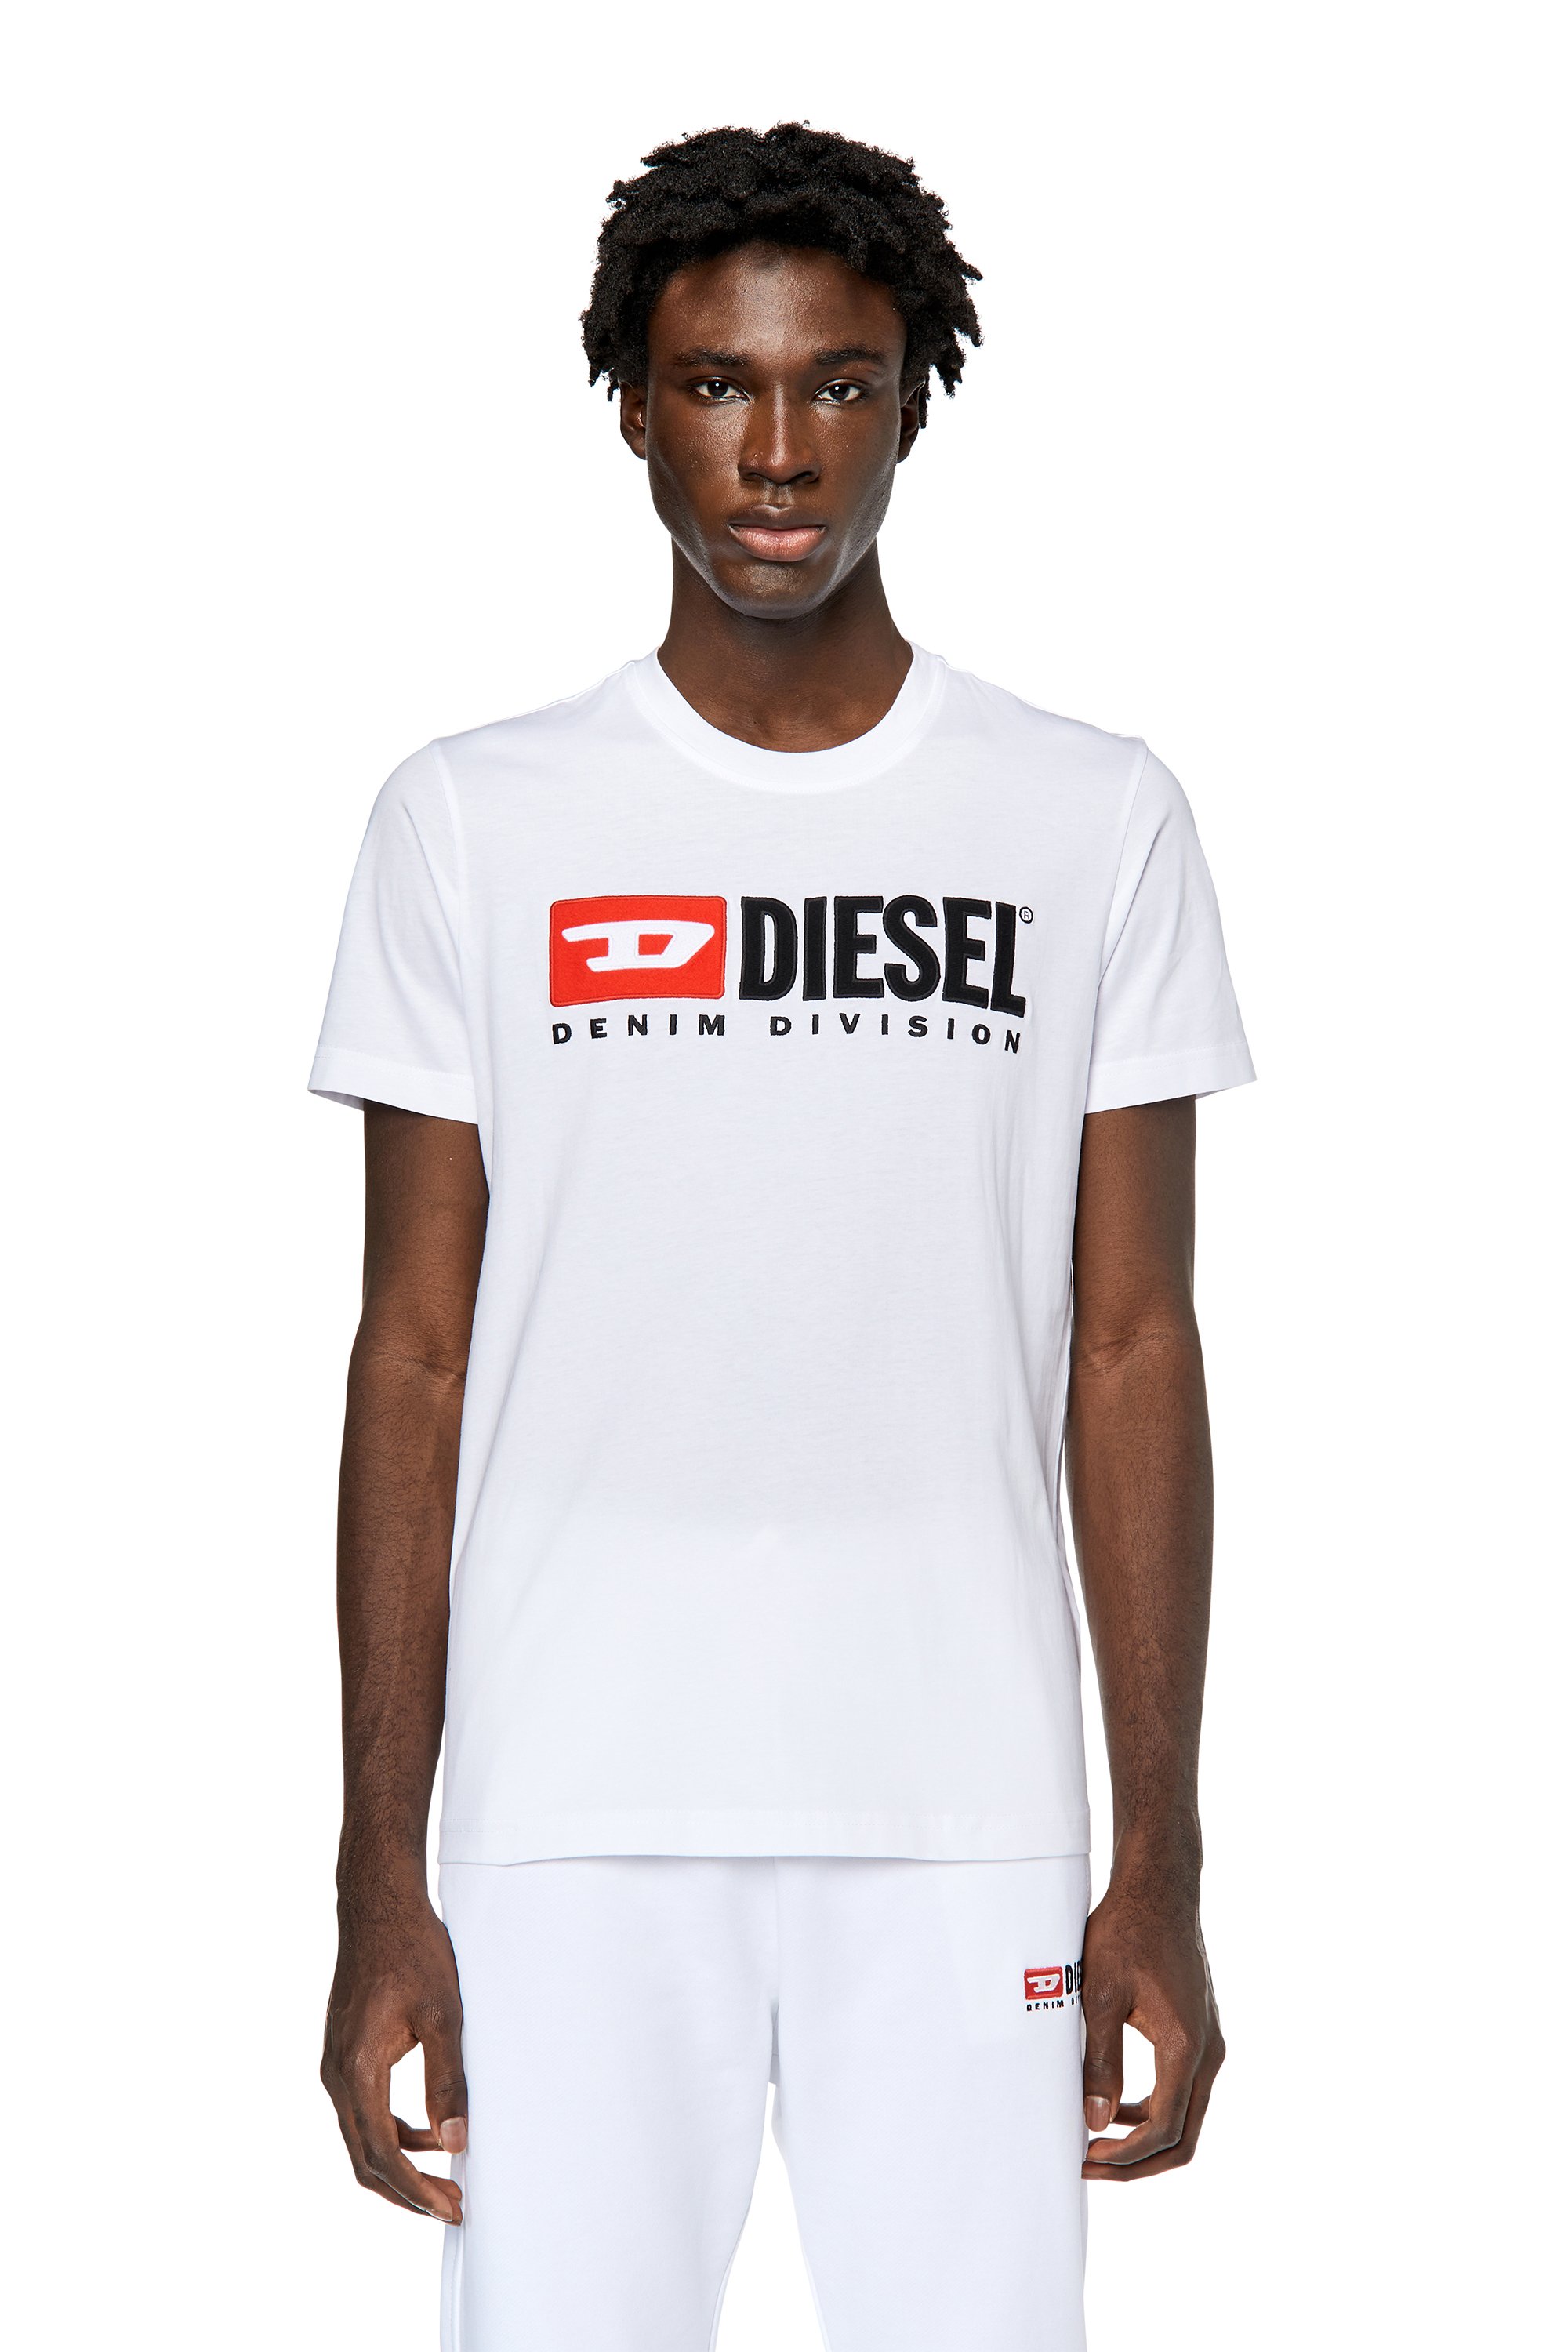 Mens and Womens Diesel Black Gold Collection | Diesel.com US